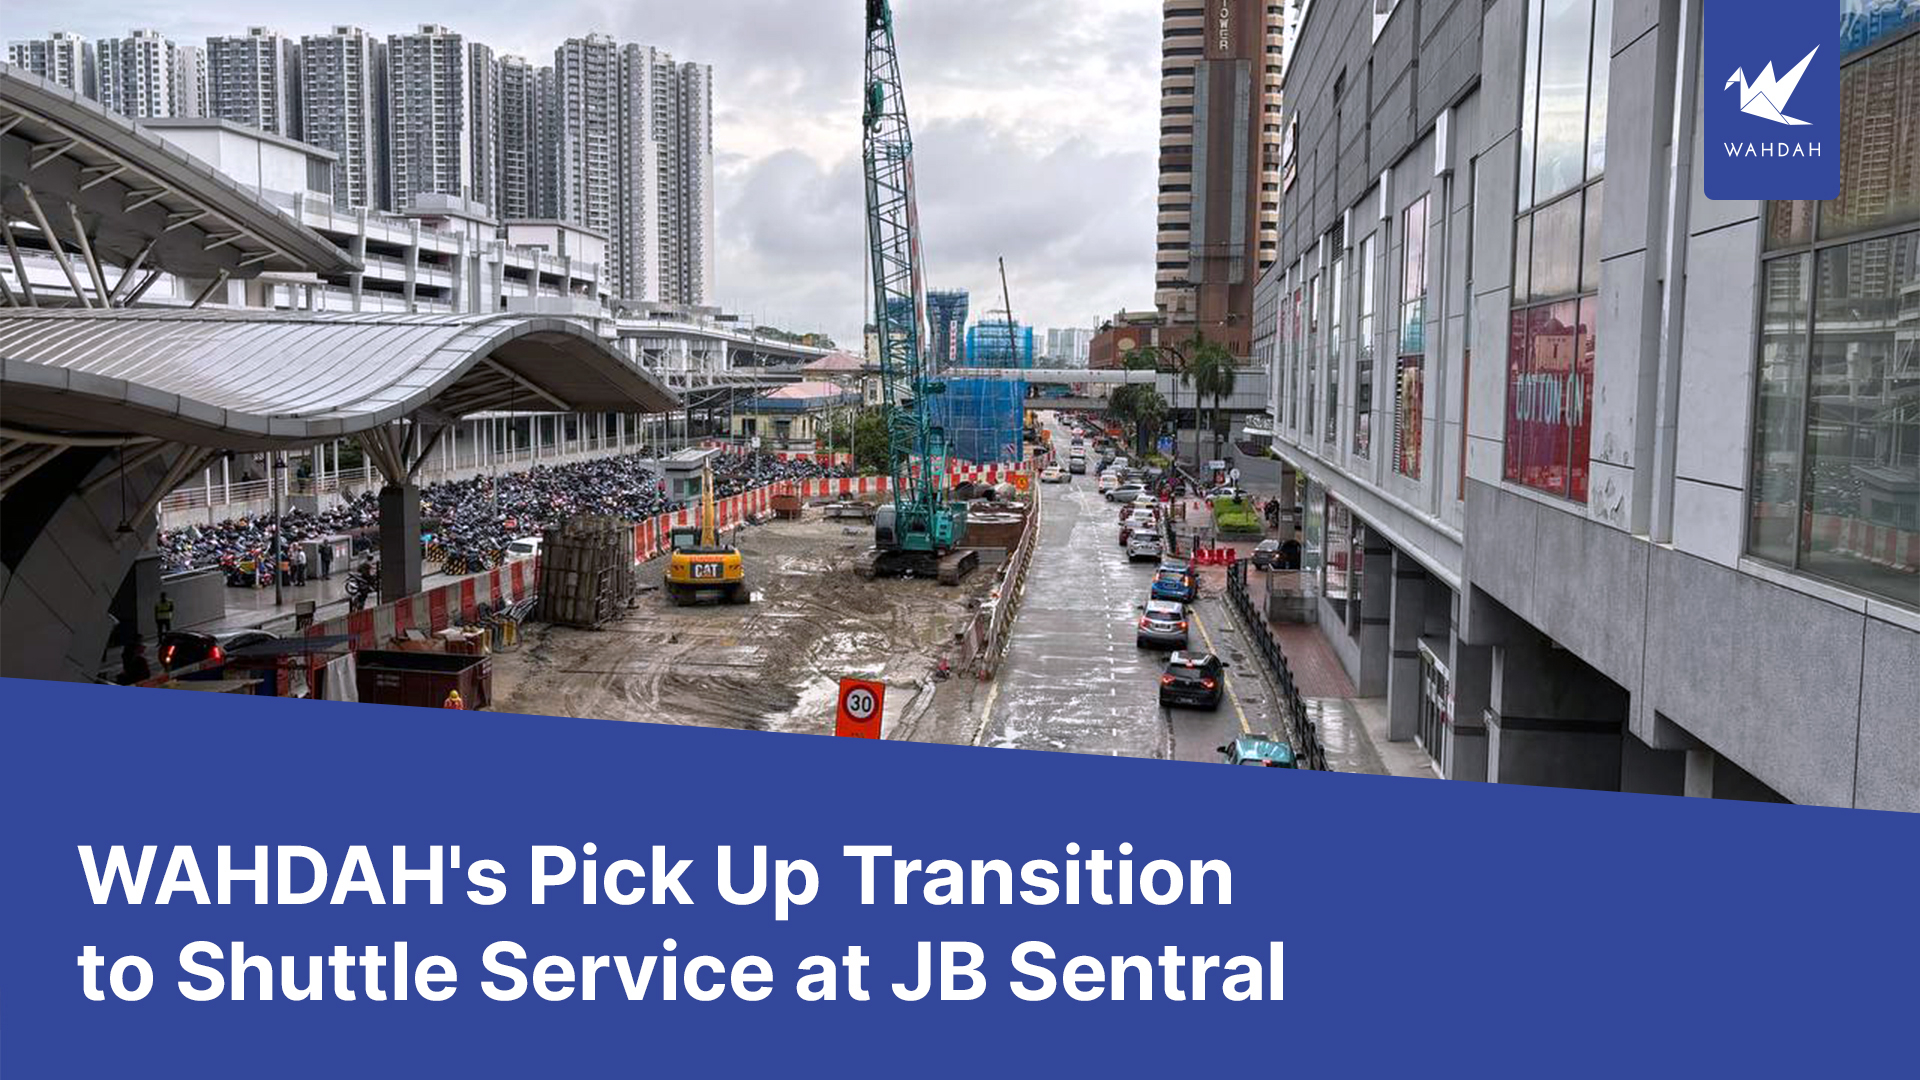 WAHDAH's Pick-Up Transition to Shuttle Service at JB Sentral